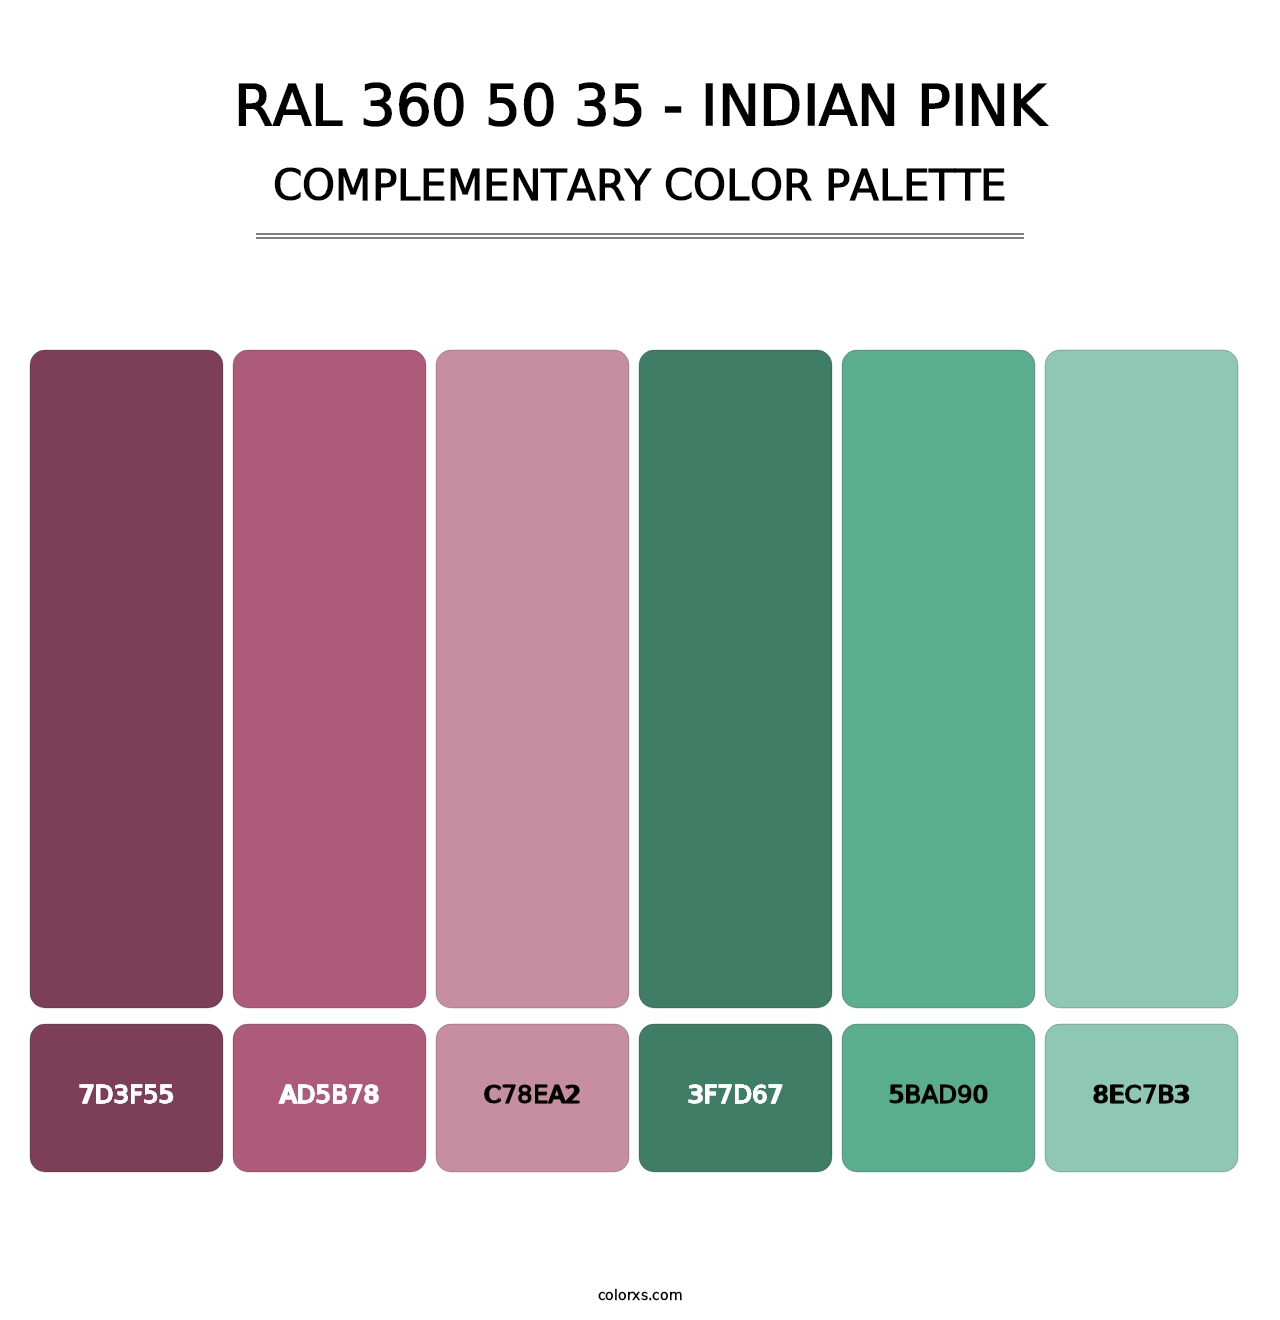 RAL 360 50 35 - Indian Pink - Complementary Color Palette